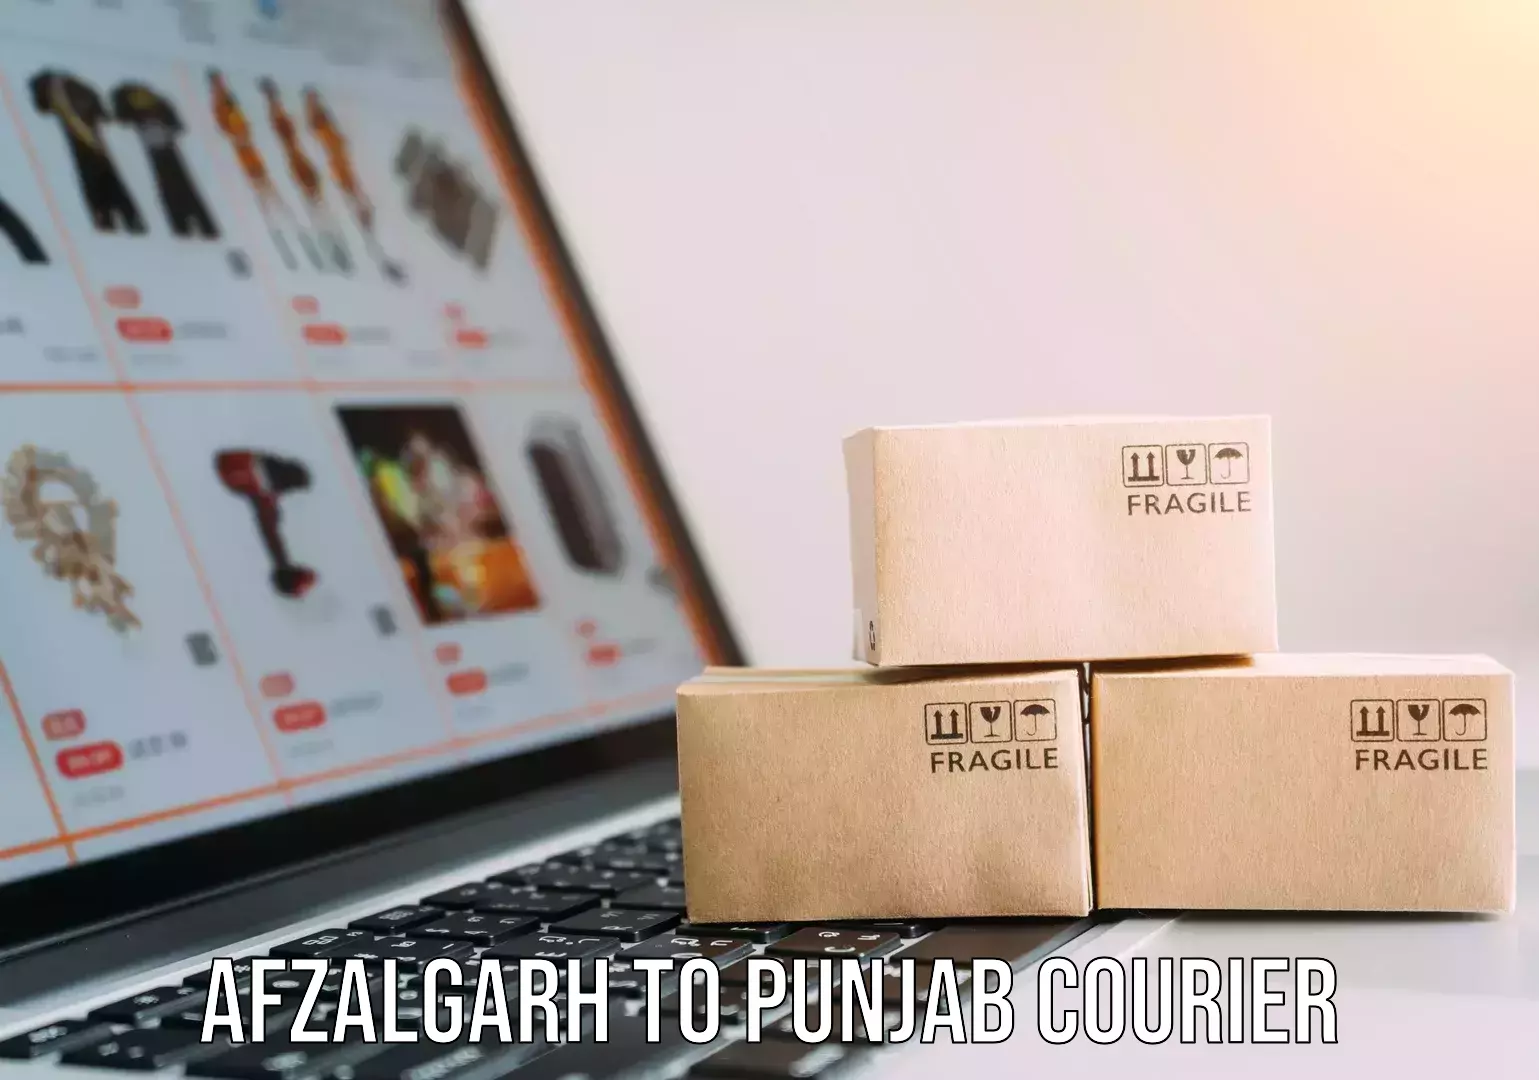 Customer-friendly courier services Afzalgarh to Punjab